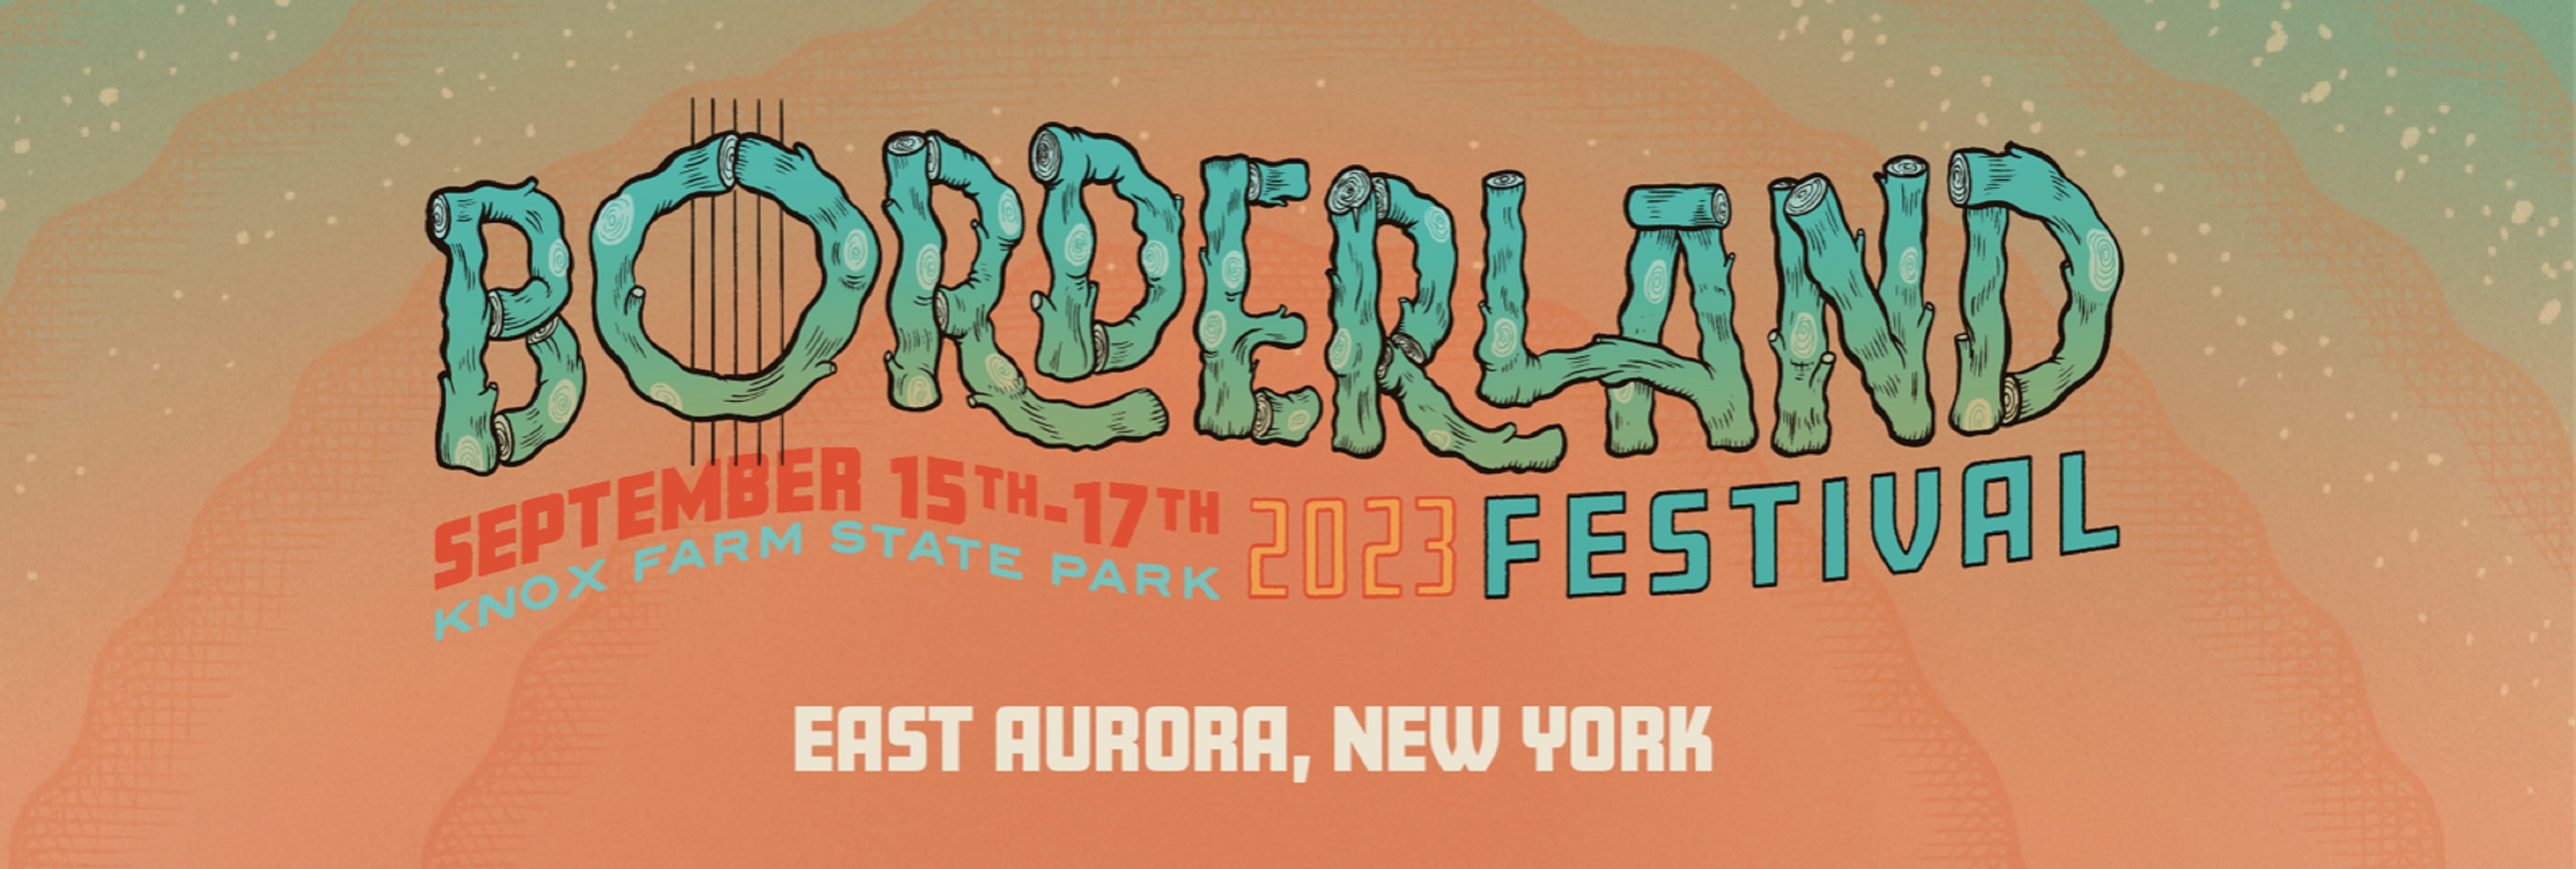 Borderland Announce Daily Lineup and Anyday Single Day Tickets